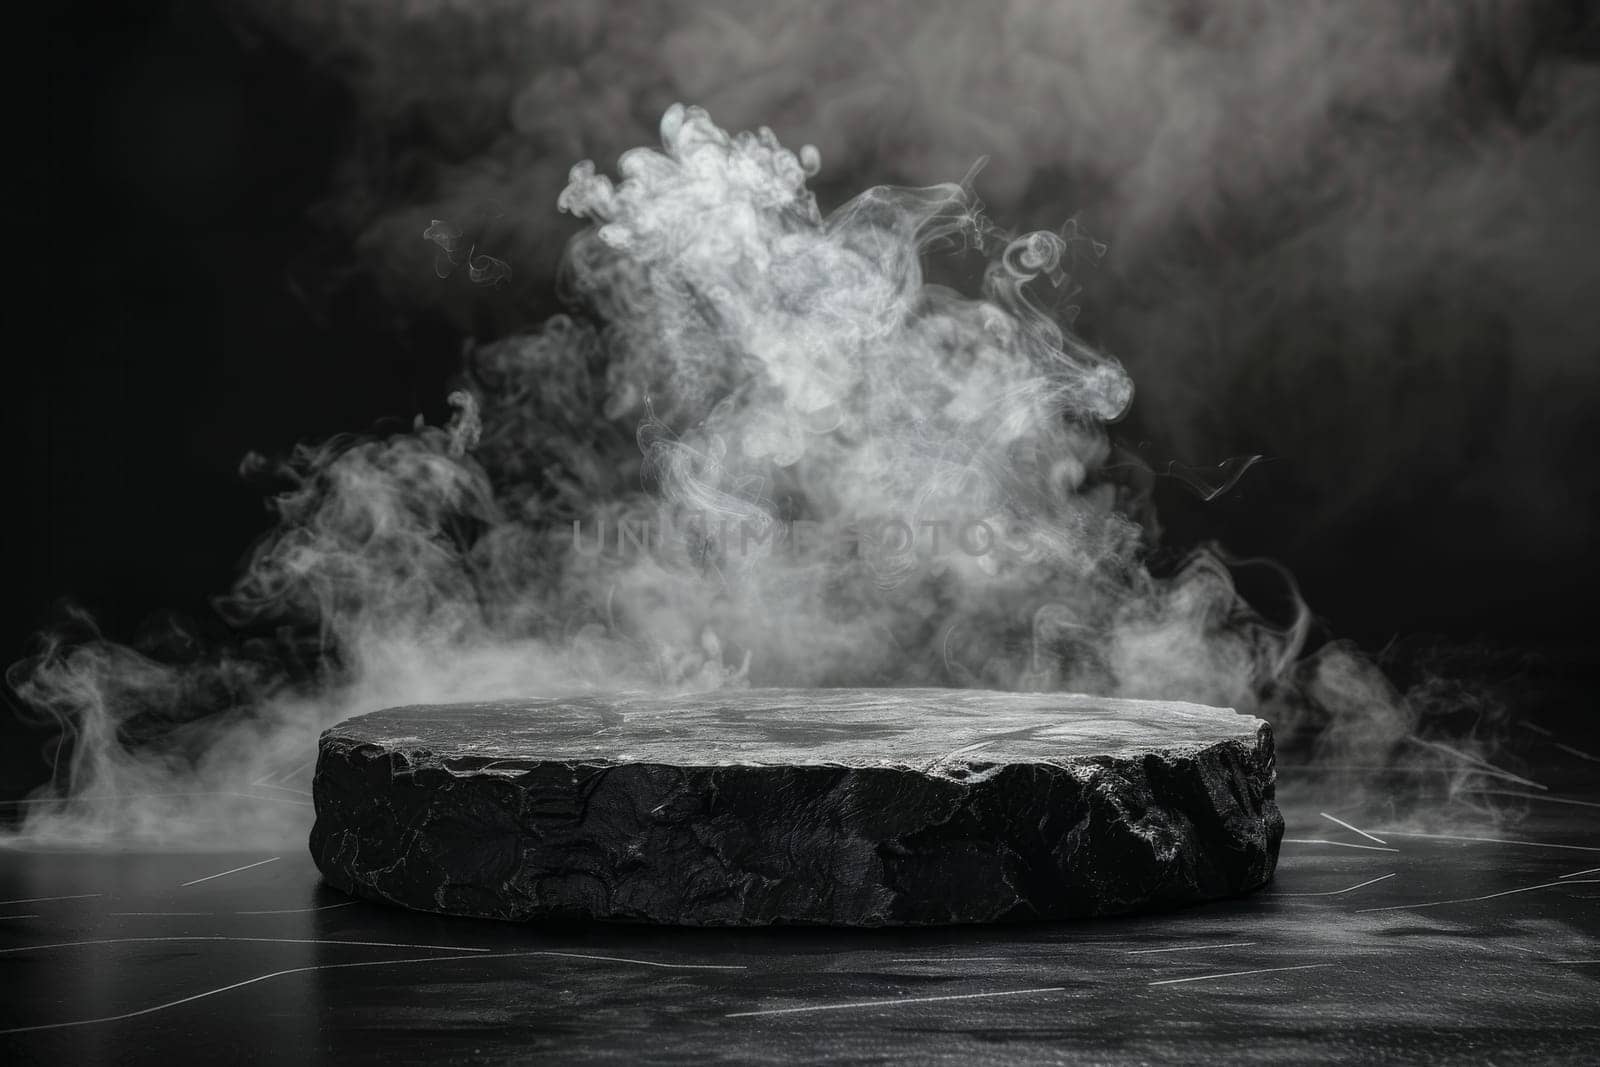 A black stone slab with smoke rising from it. The smoke is thick and billowing, creating a sense of mystery and intrigue